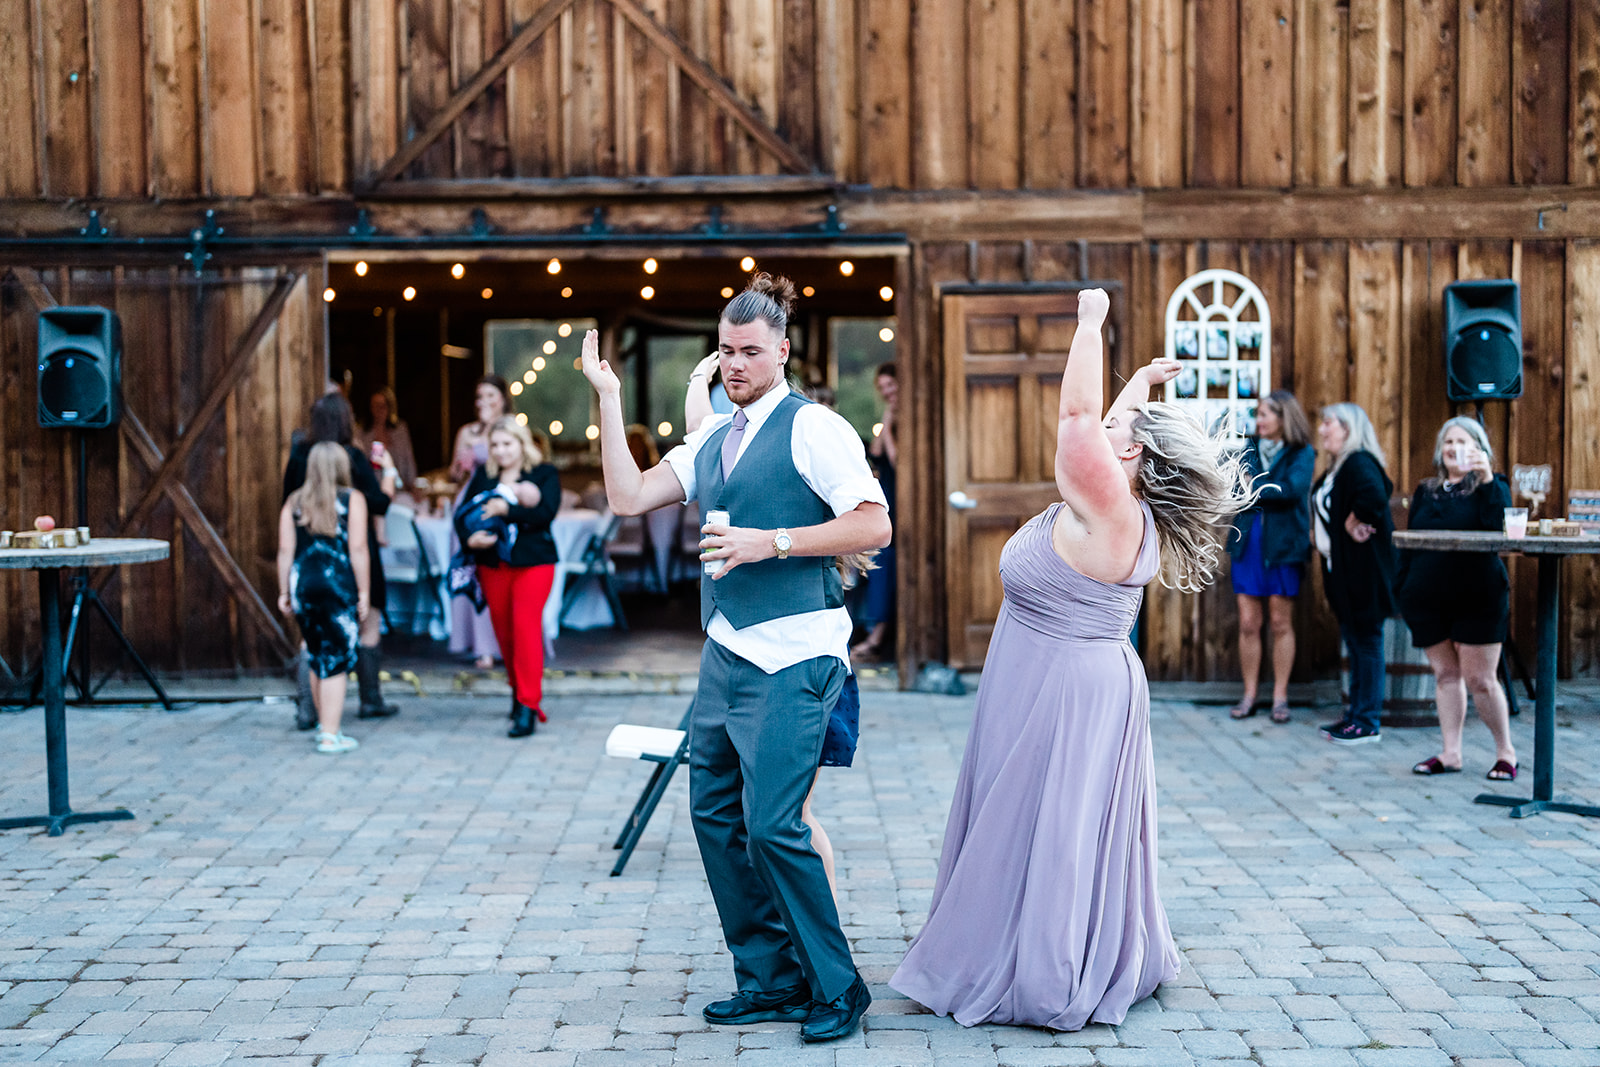 Guest dancing at a Cattle Barn Wedding